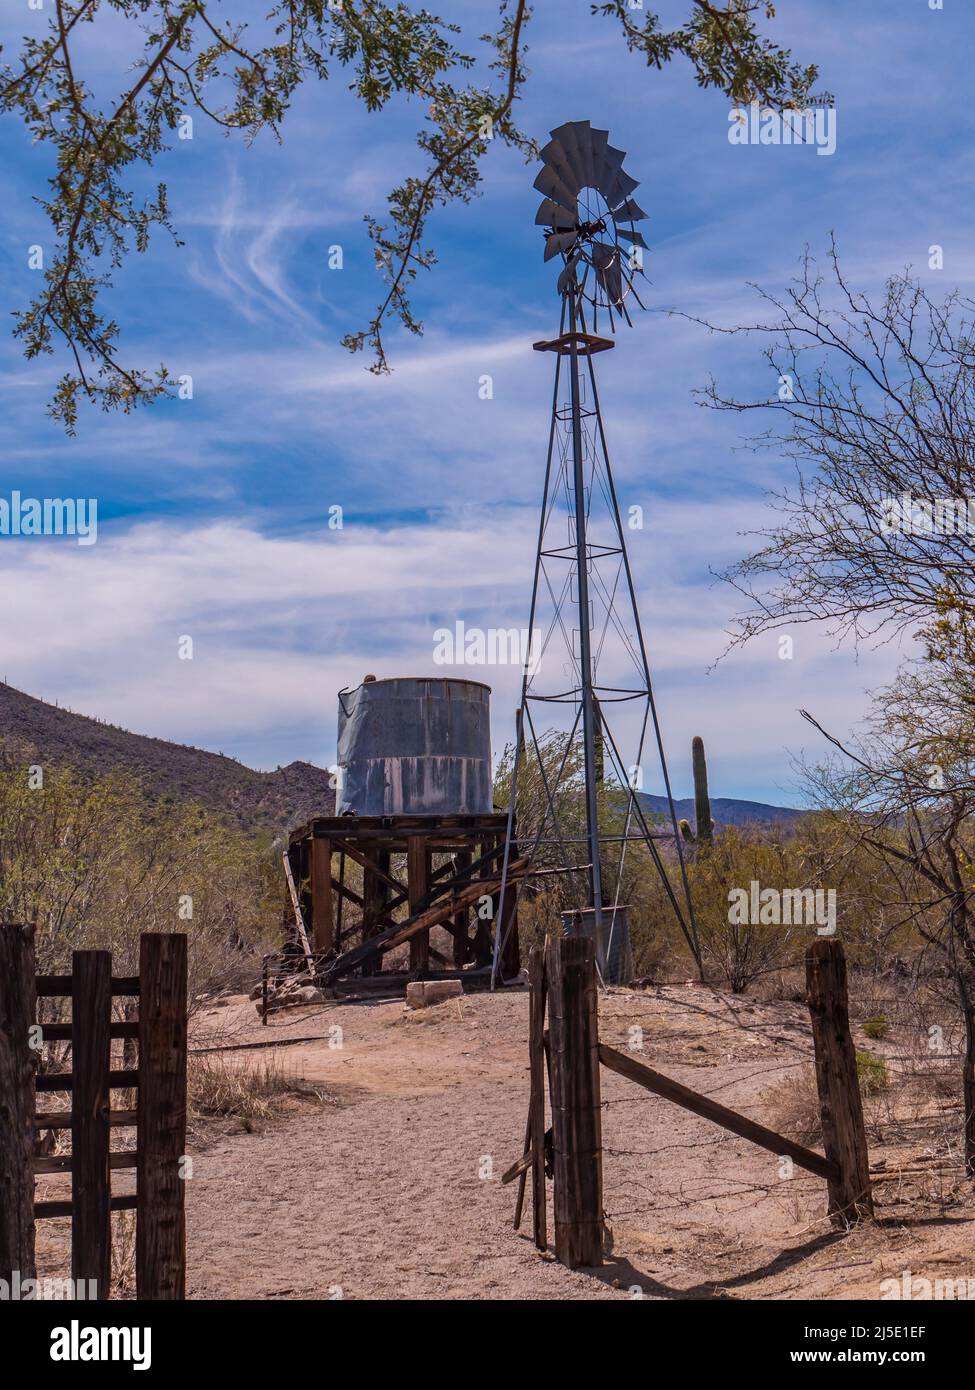 Bates Well Ranch, south windmill, Bates Well Road, Organ Pipe Cactus National Monument, Arizona. Stock Photo